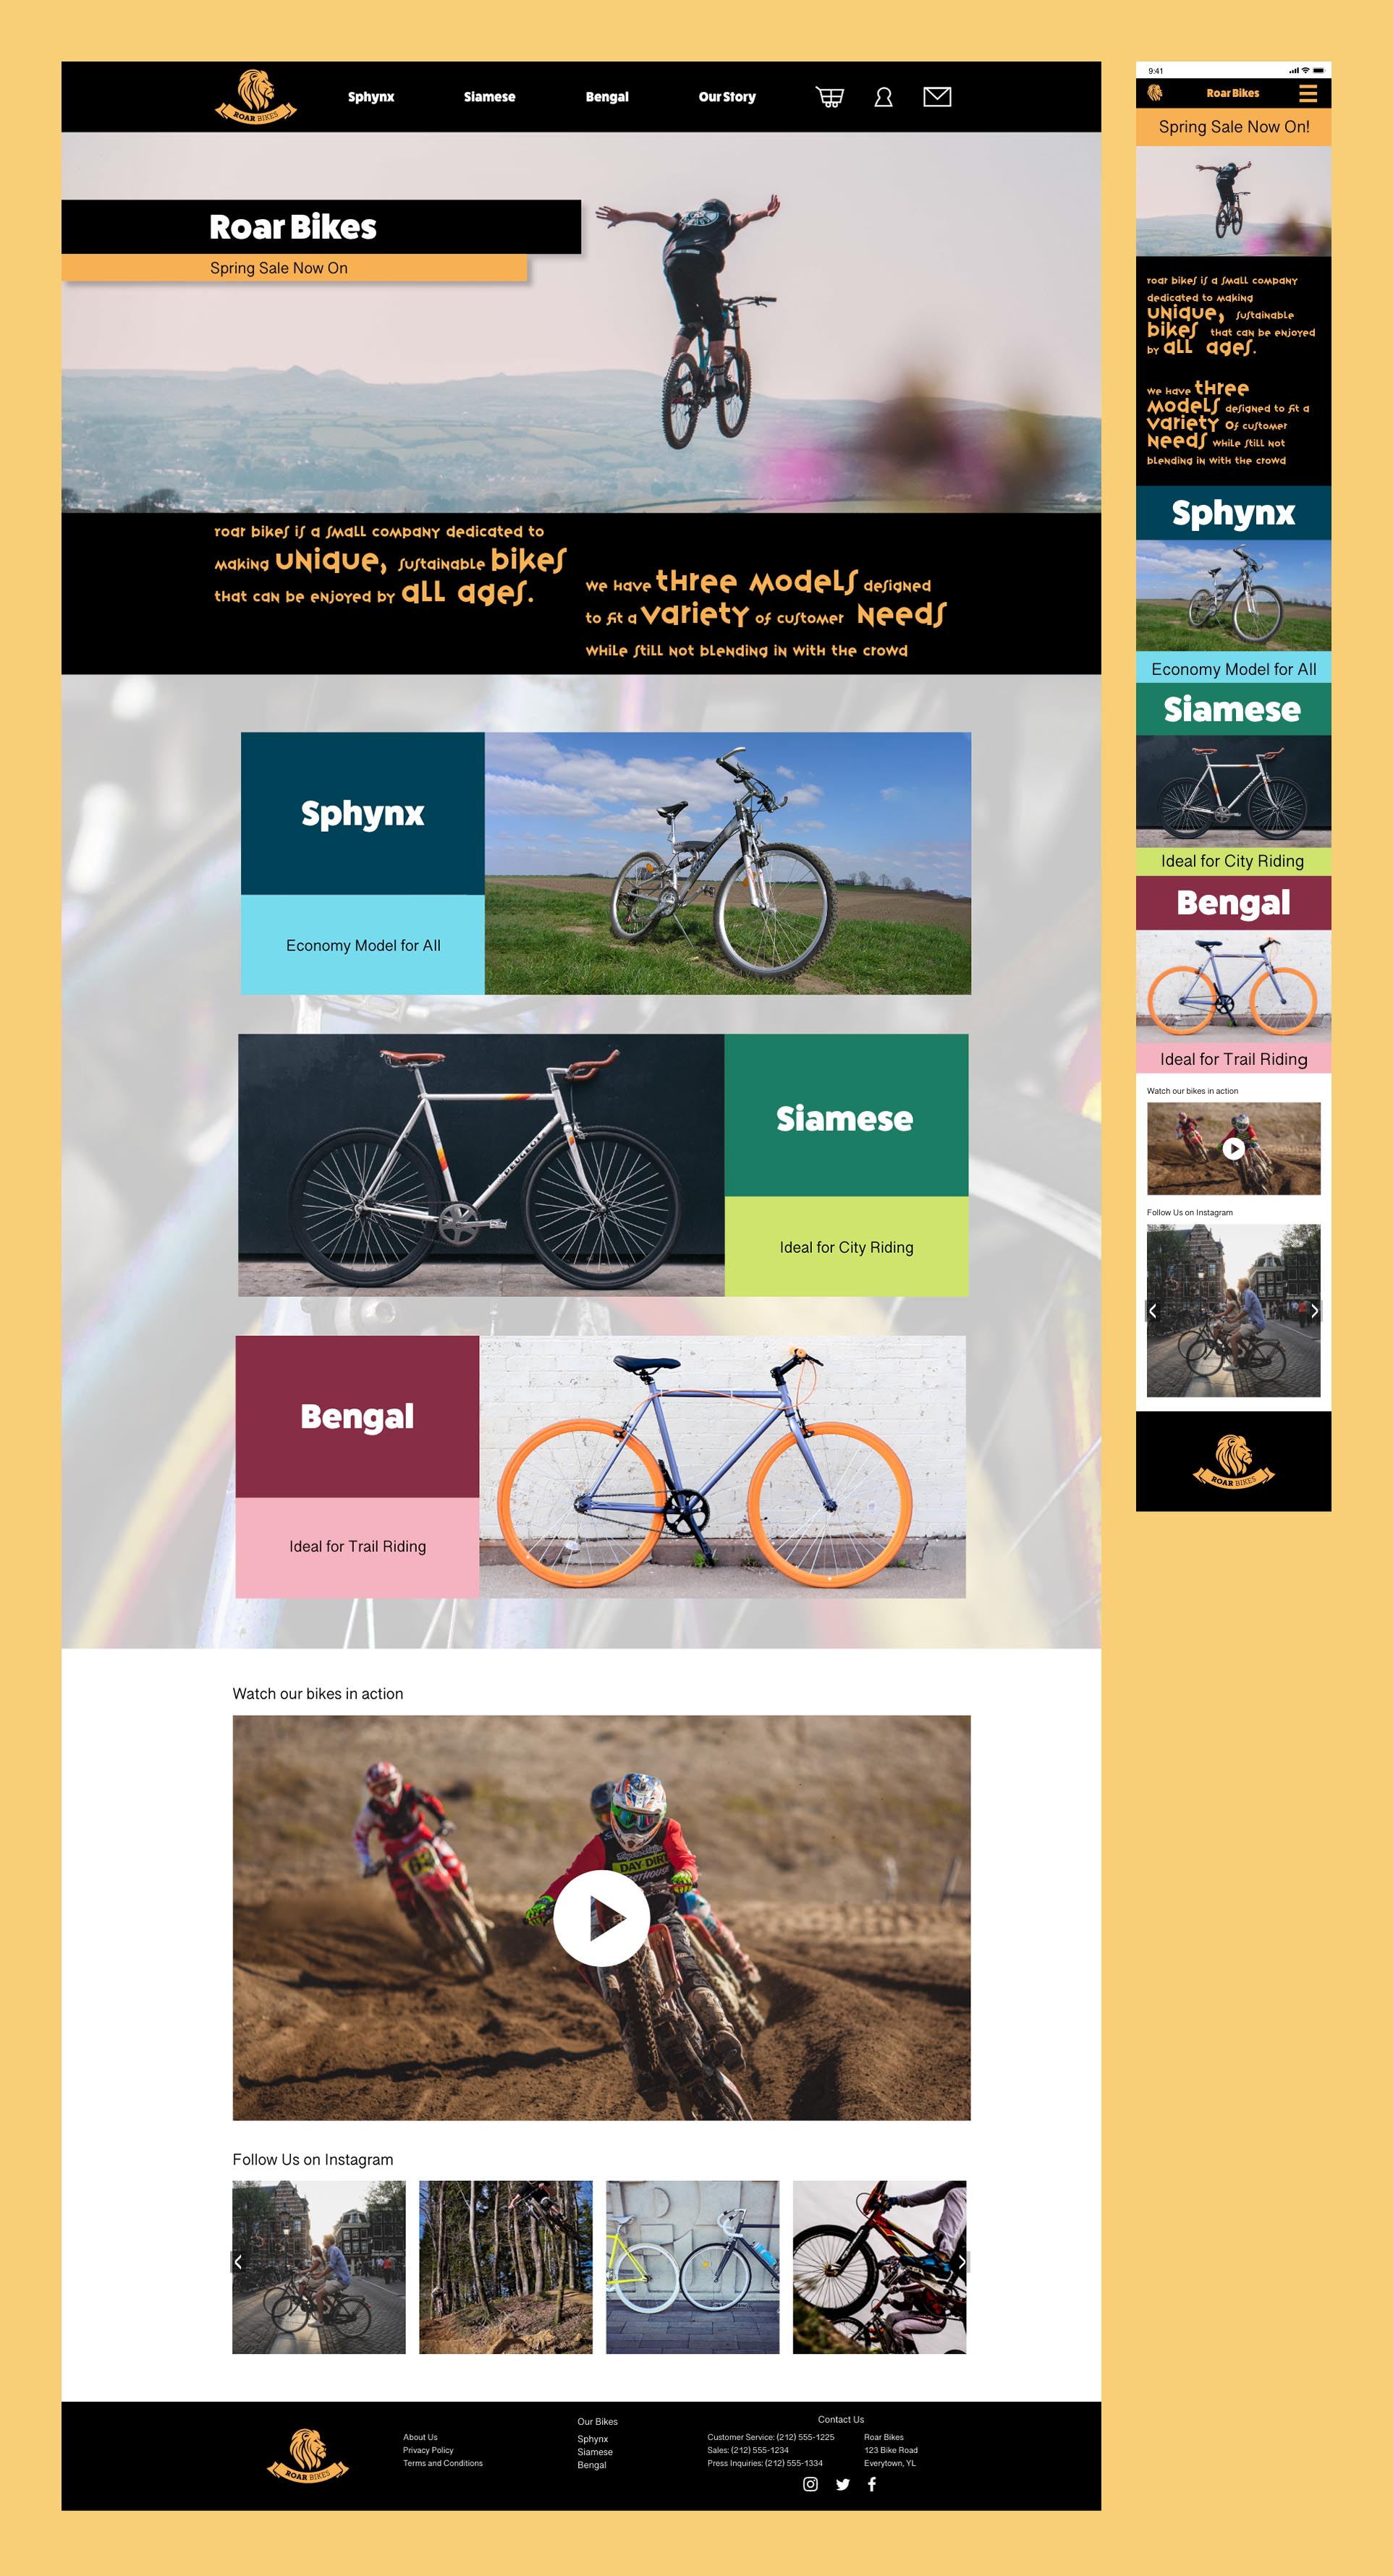 Mockup of the home page from Roar Bikes website.